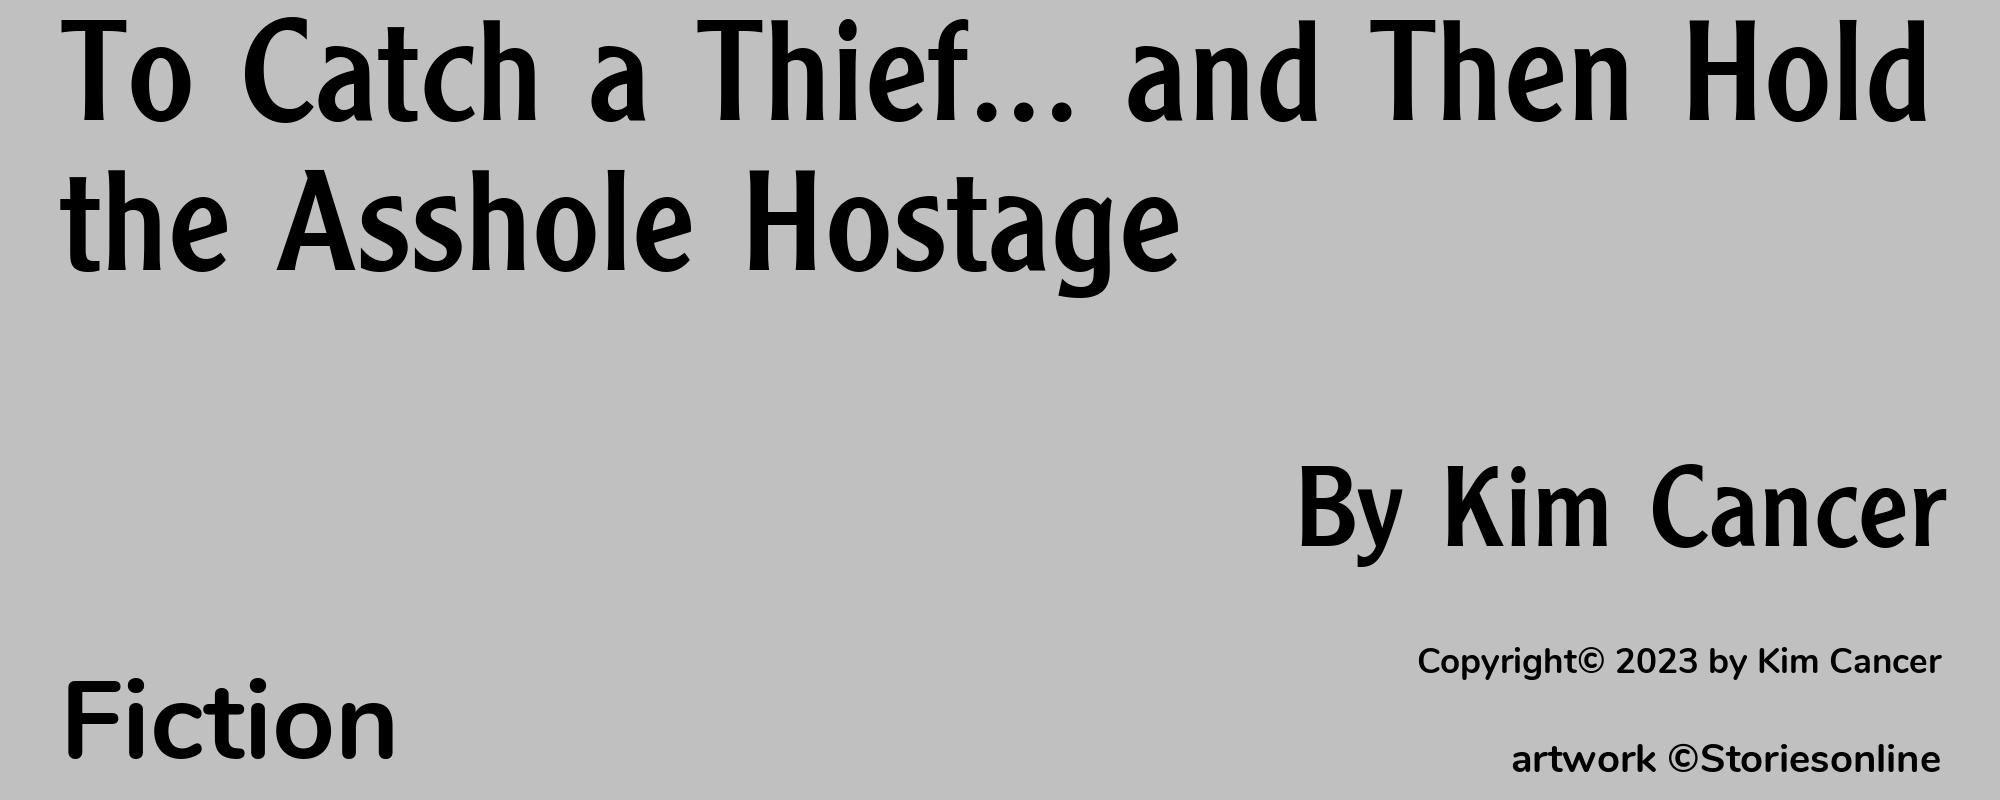 To Catch a Thief... and Then Hold the Asshole Hostage - Cover